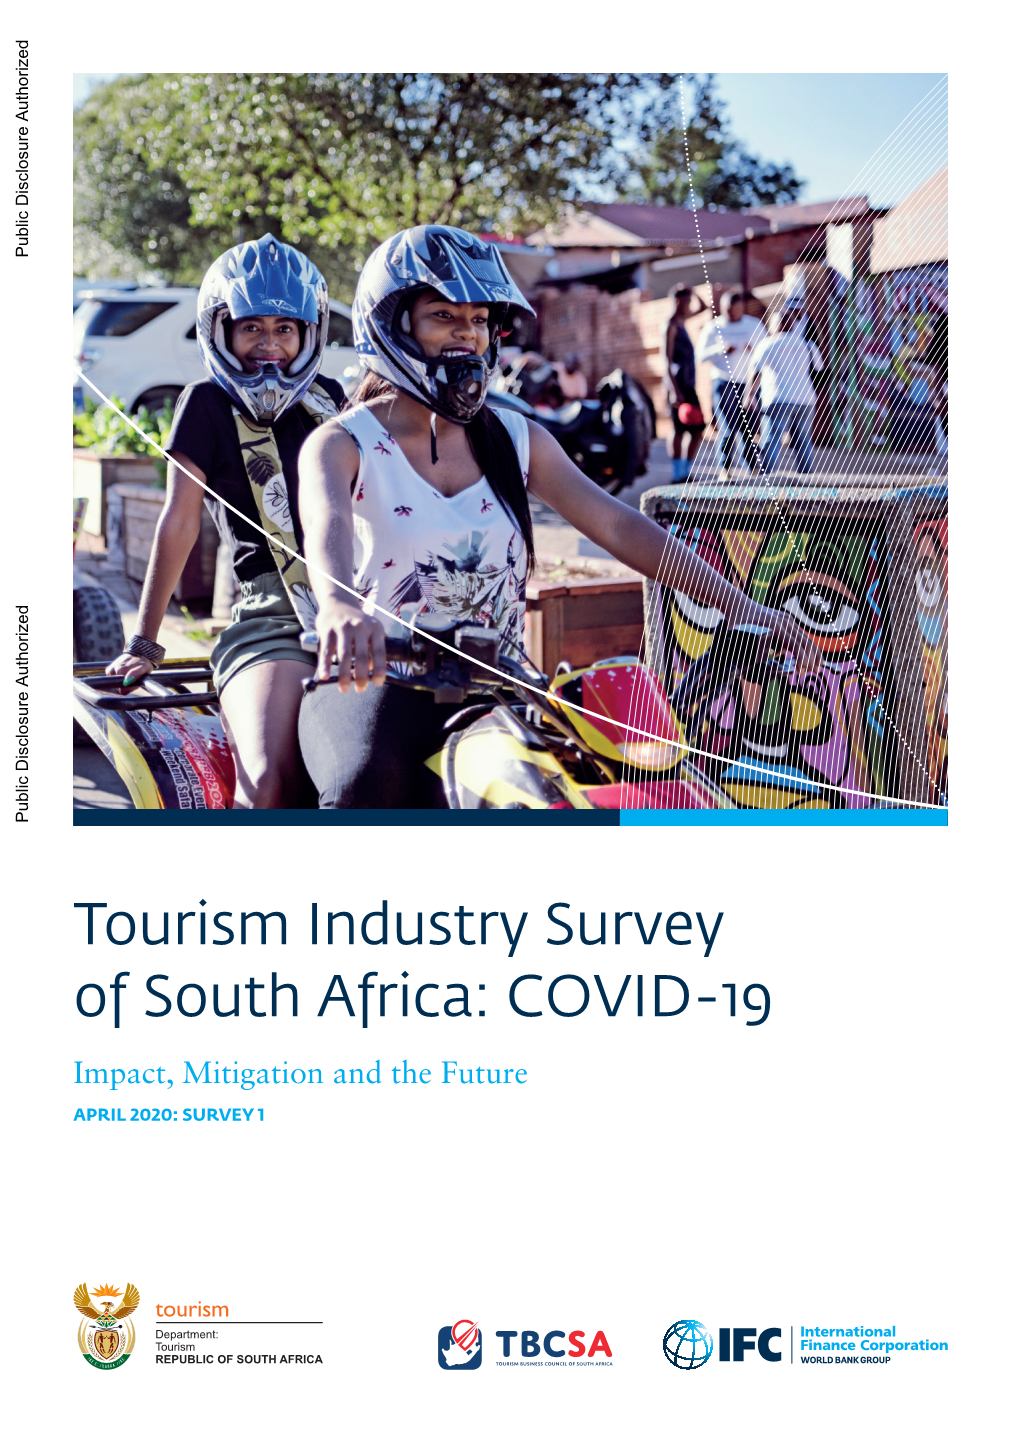 Tourism Industry Survey of South Africa: COVID-19 Impact, Mitigation and the Future